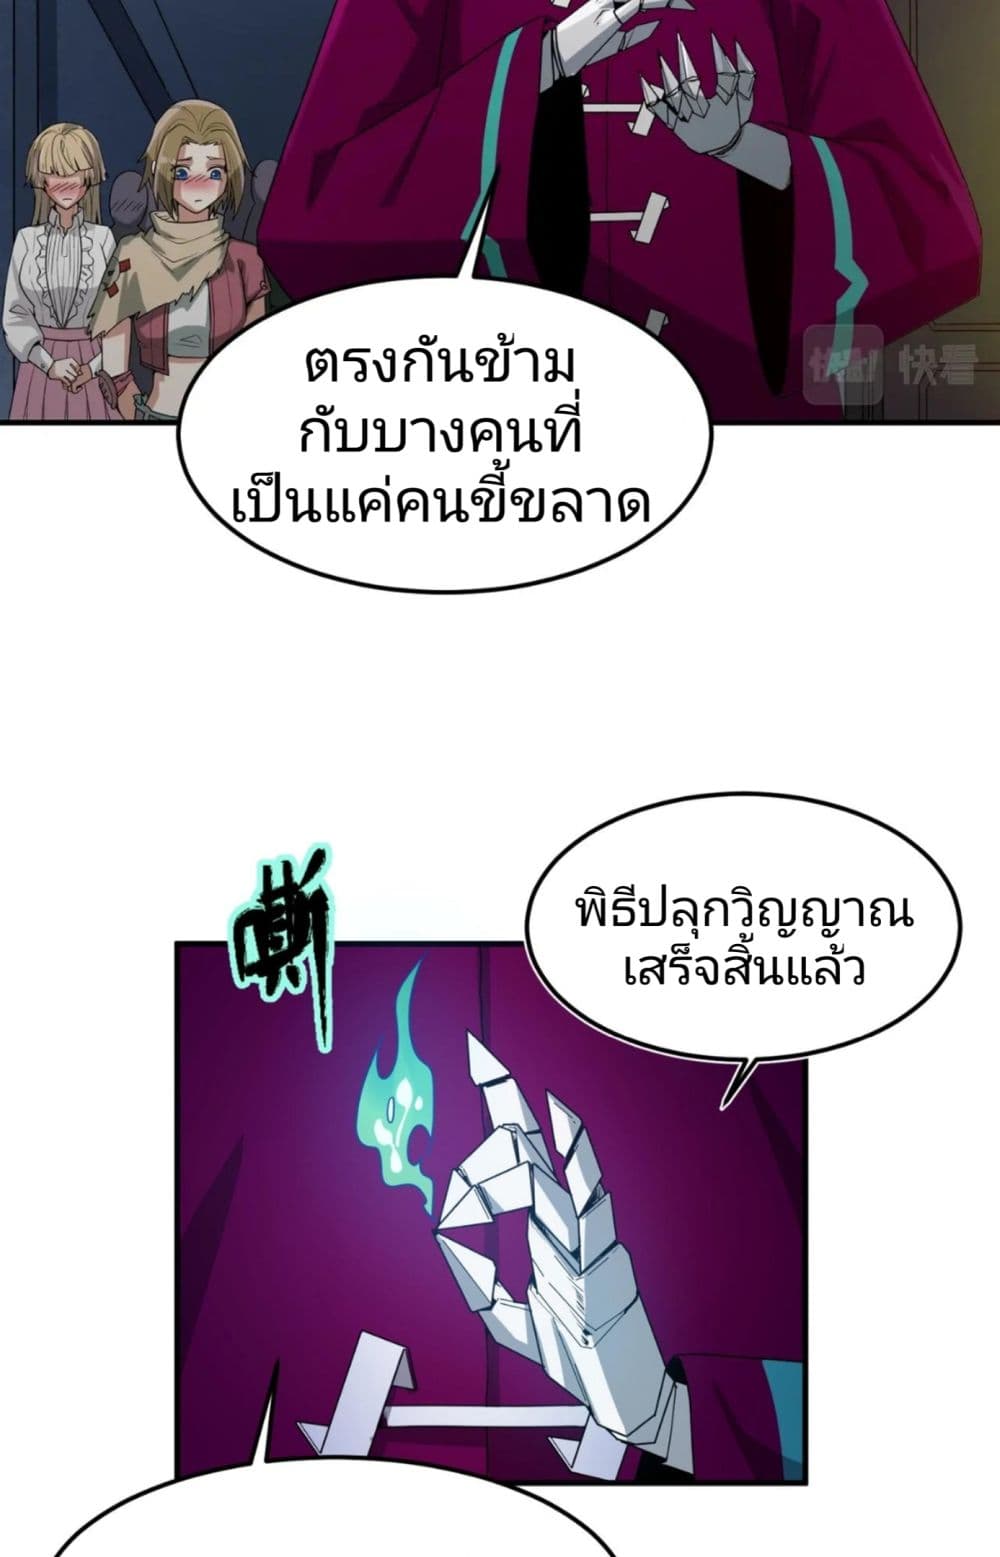 The Age of Ghost Spirits à¸à¸­à¸à¸à¸µà¹ 2 (34)